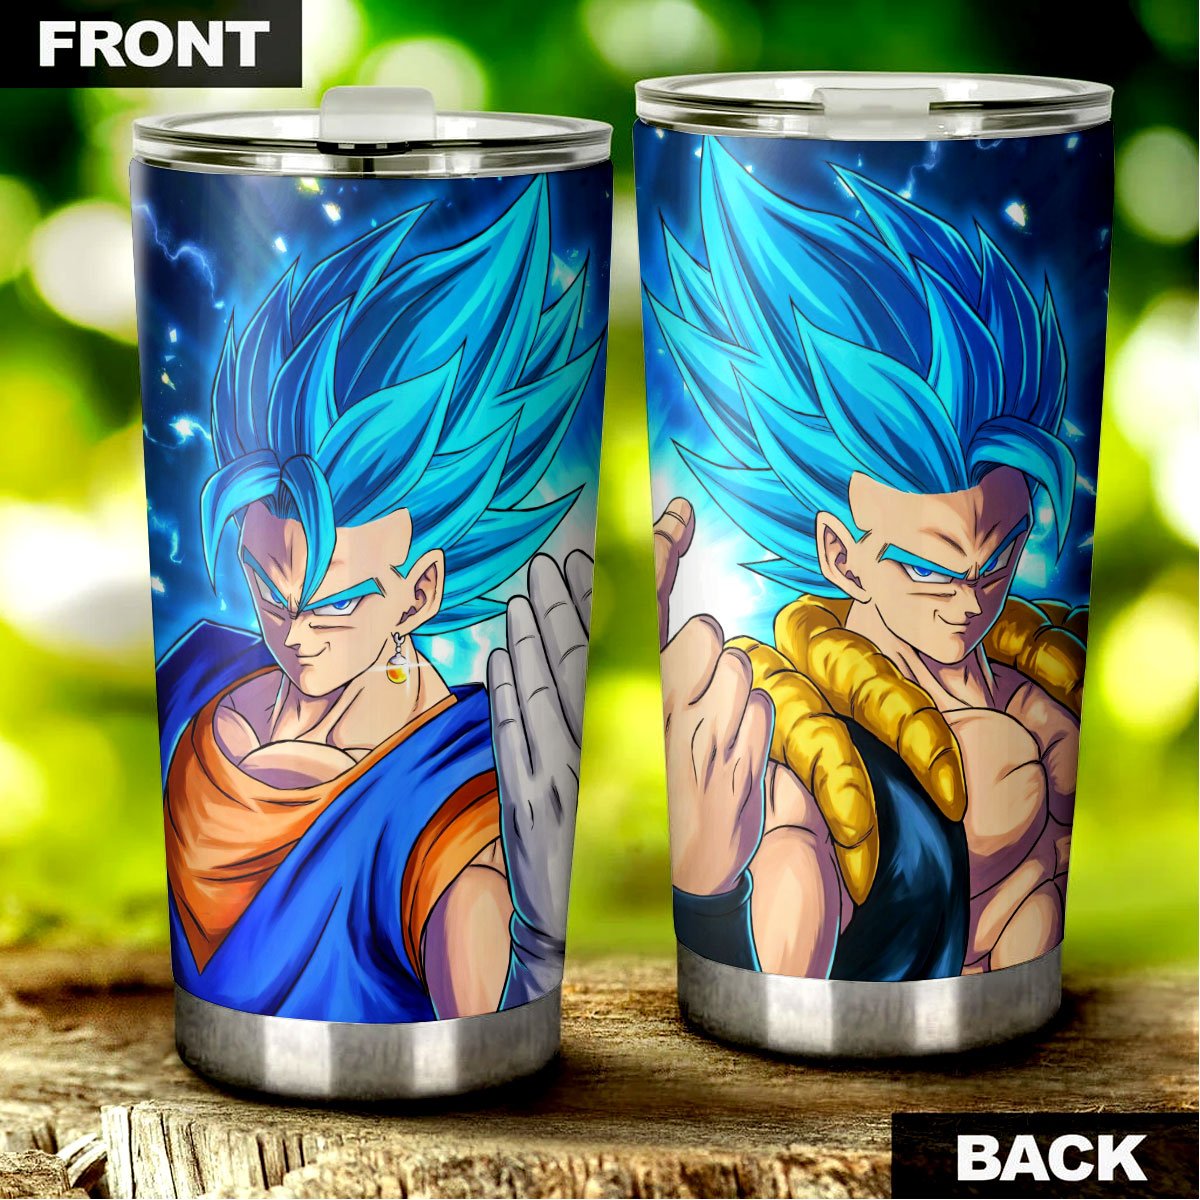 vegito and gogeta dragon ball stainless steel tumbler cup